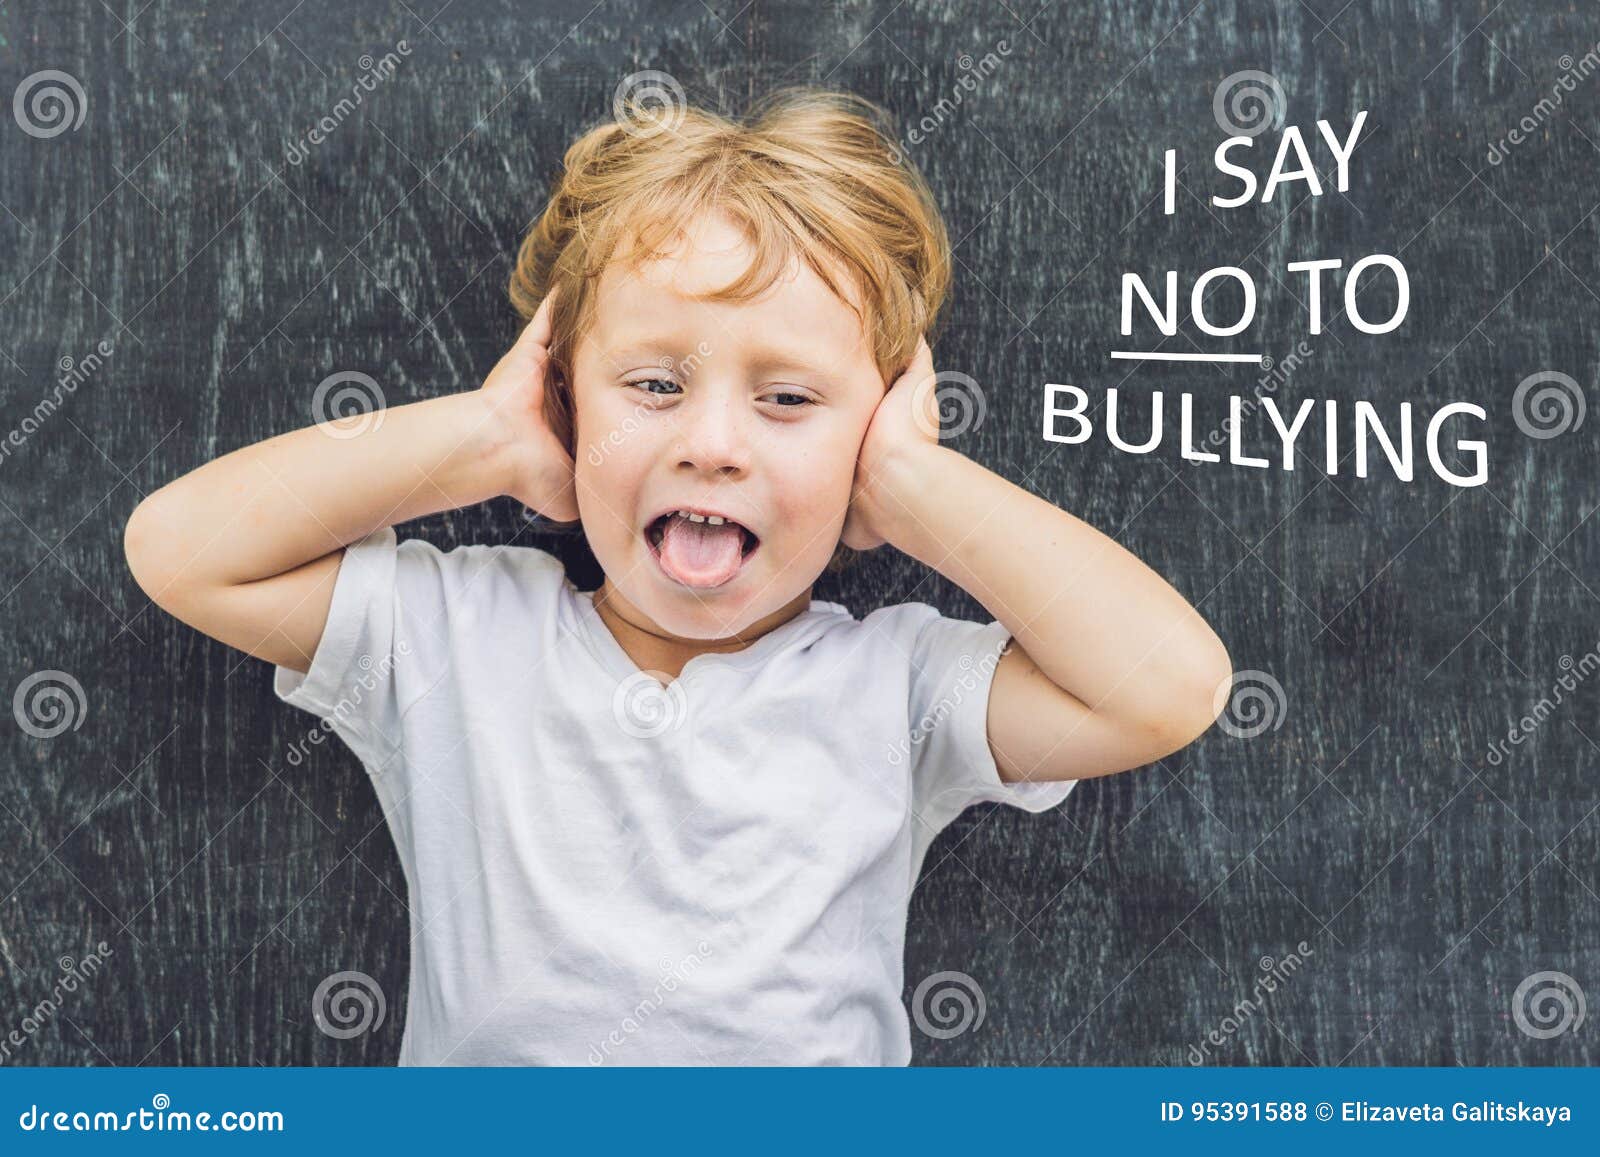 Little Boy Standing Up for Himself and Saying NO To Bullying by Blowing ...